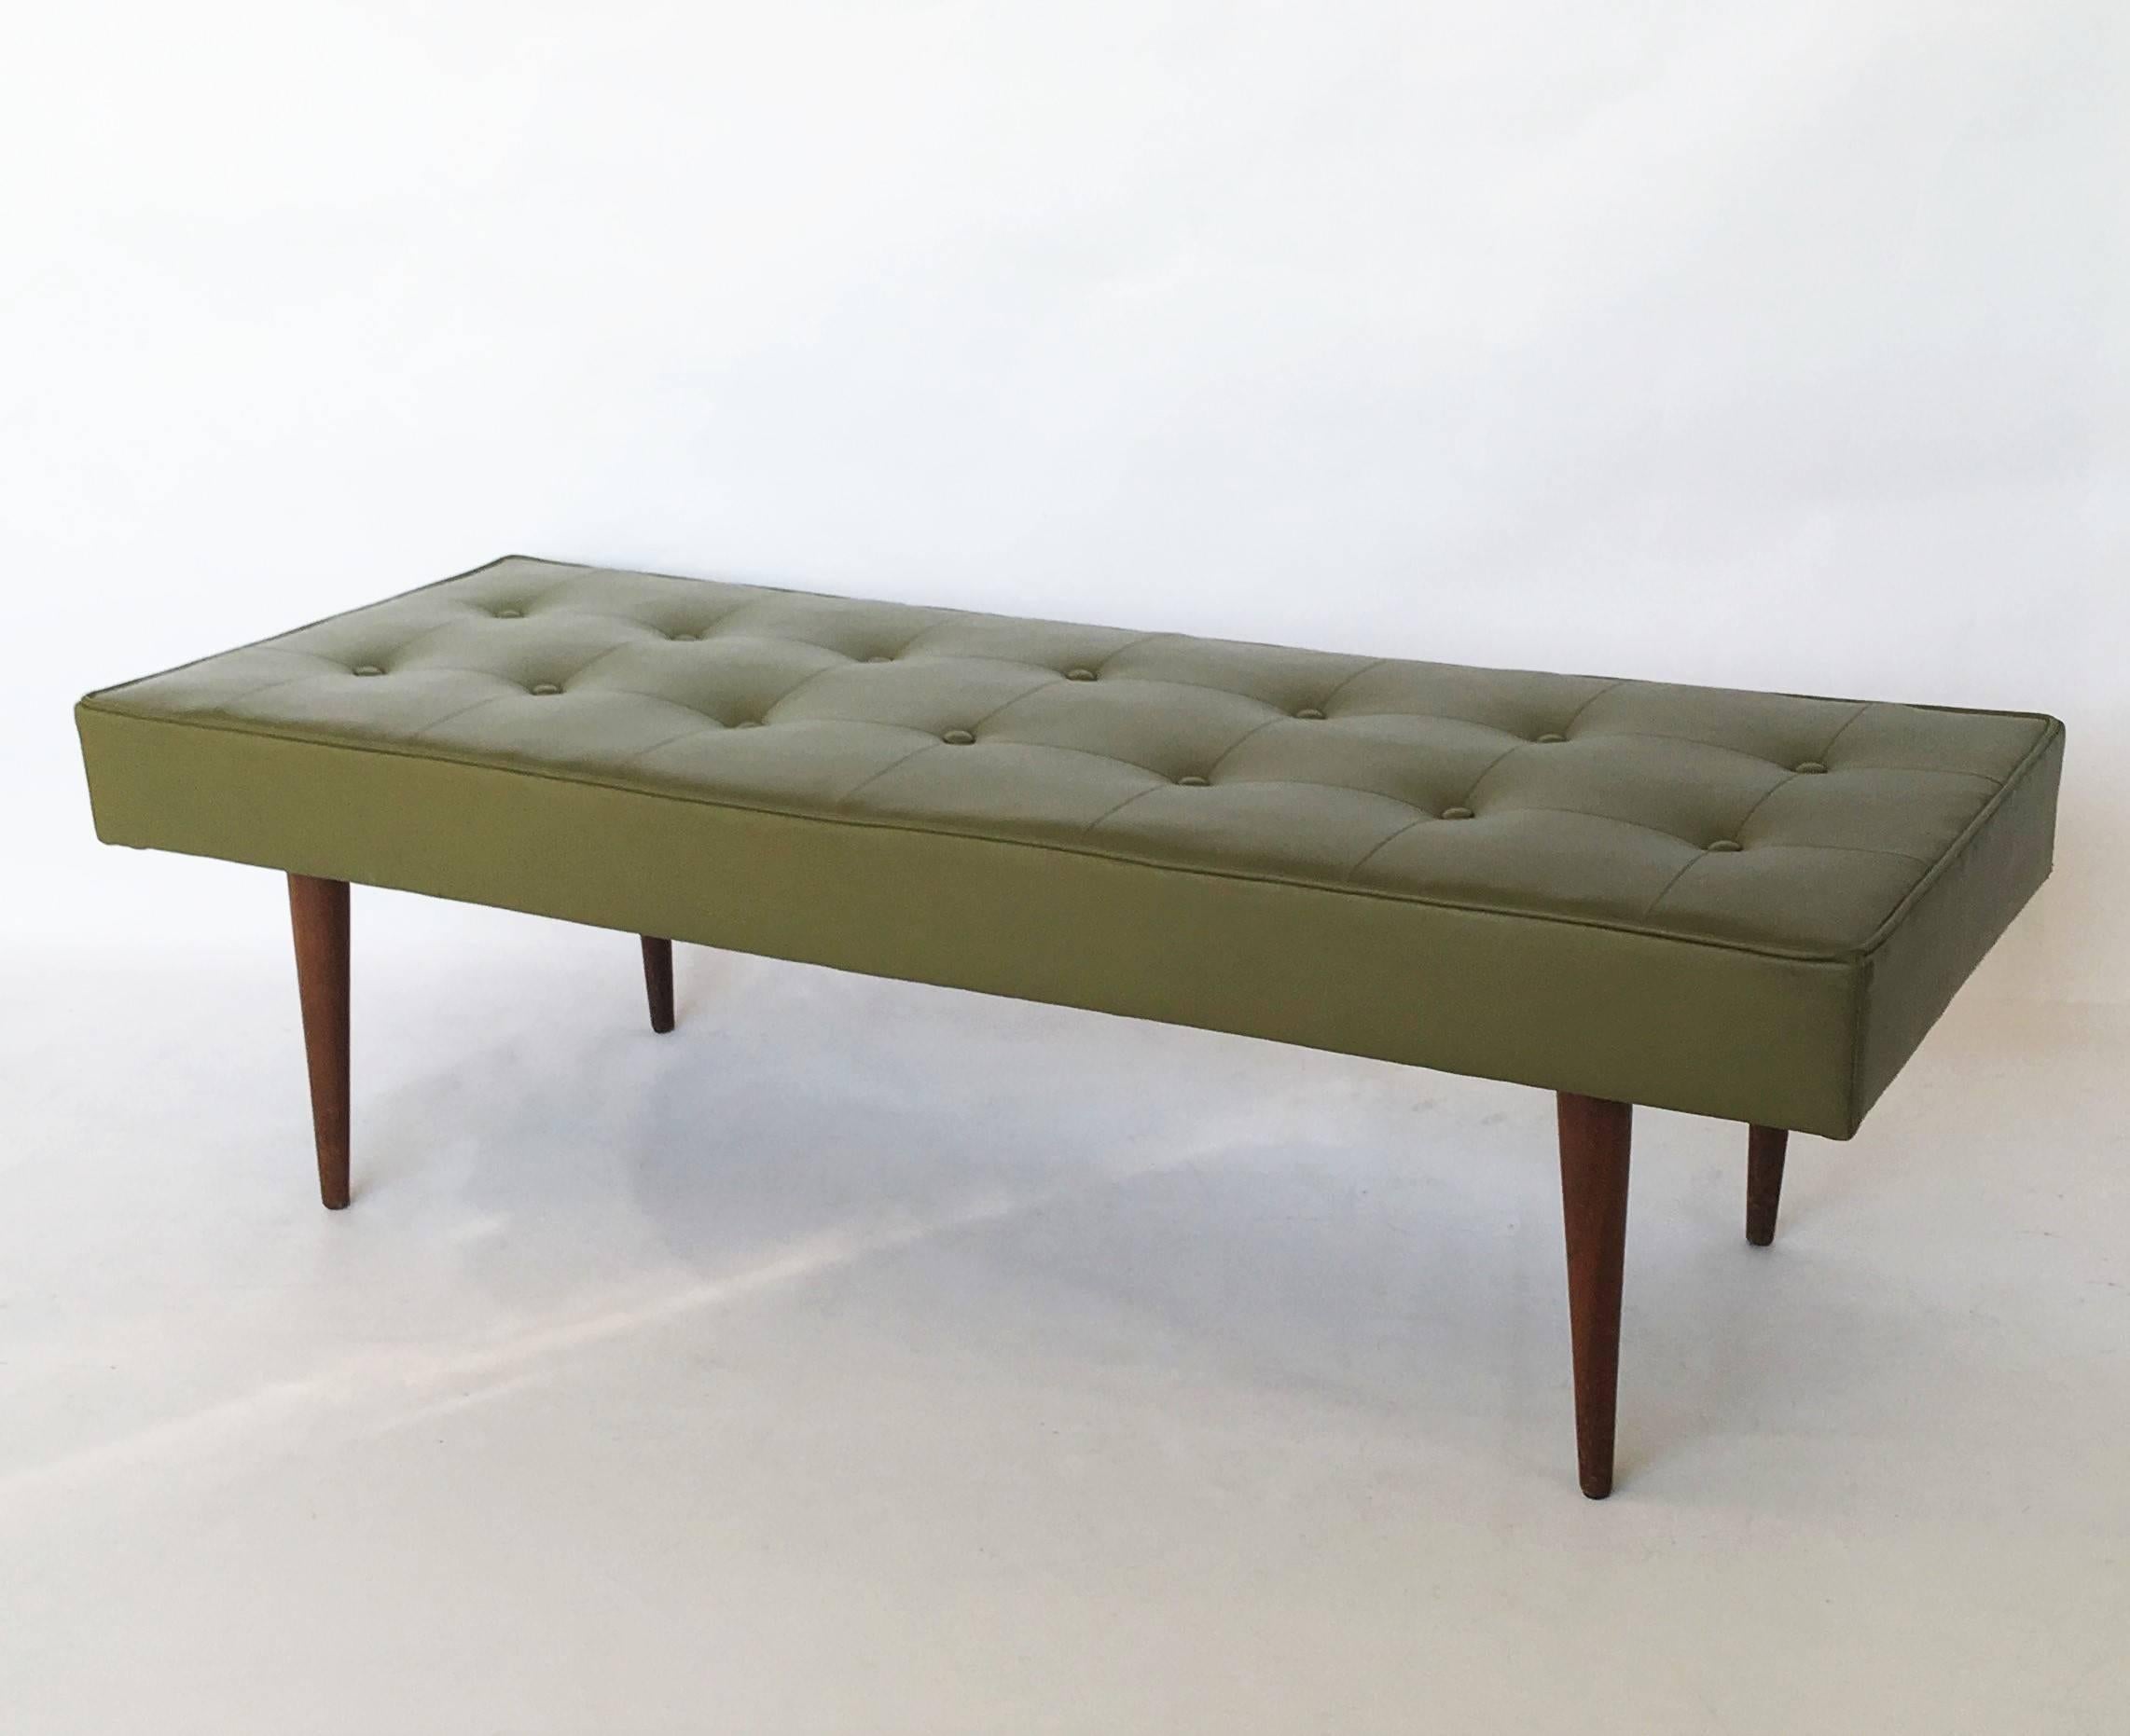 Simple and elegant Mid-Century Modern rectangular bench by Baughman for Thayer Coggin. Bench is upholstered in original green; tufting and piping add visual interest. Finished with tapered legs in dark walnut. In nice vintage condition.